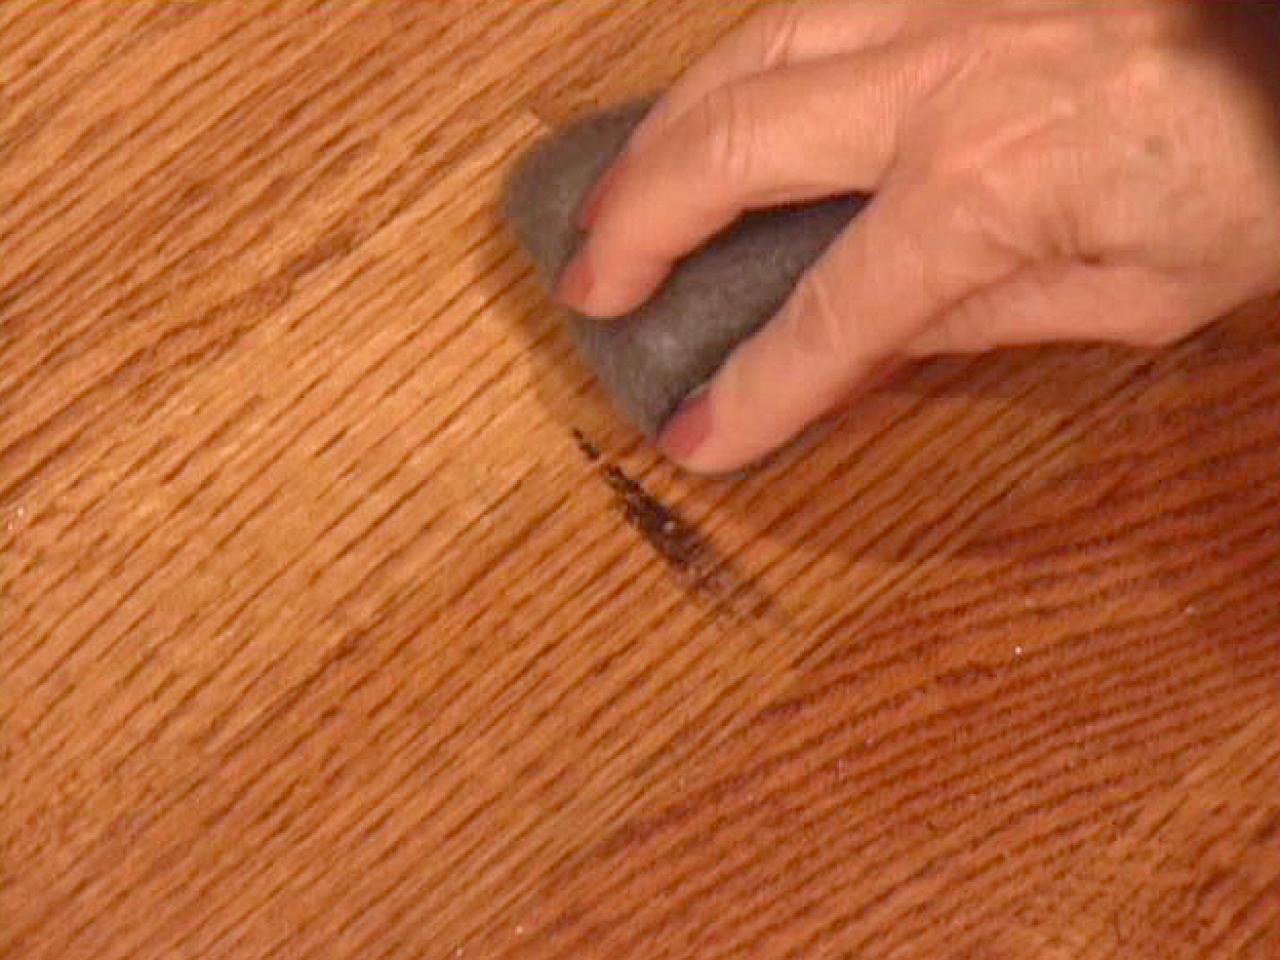 How To Touch Up Wood Floors Tos Diy, How To Repair Stained Hardwood Floors